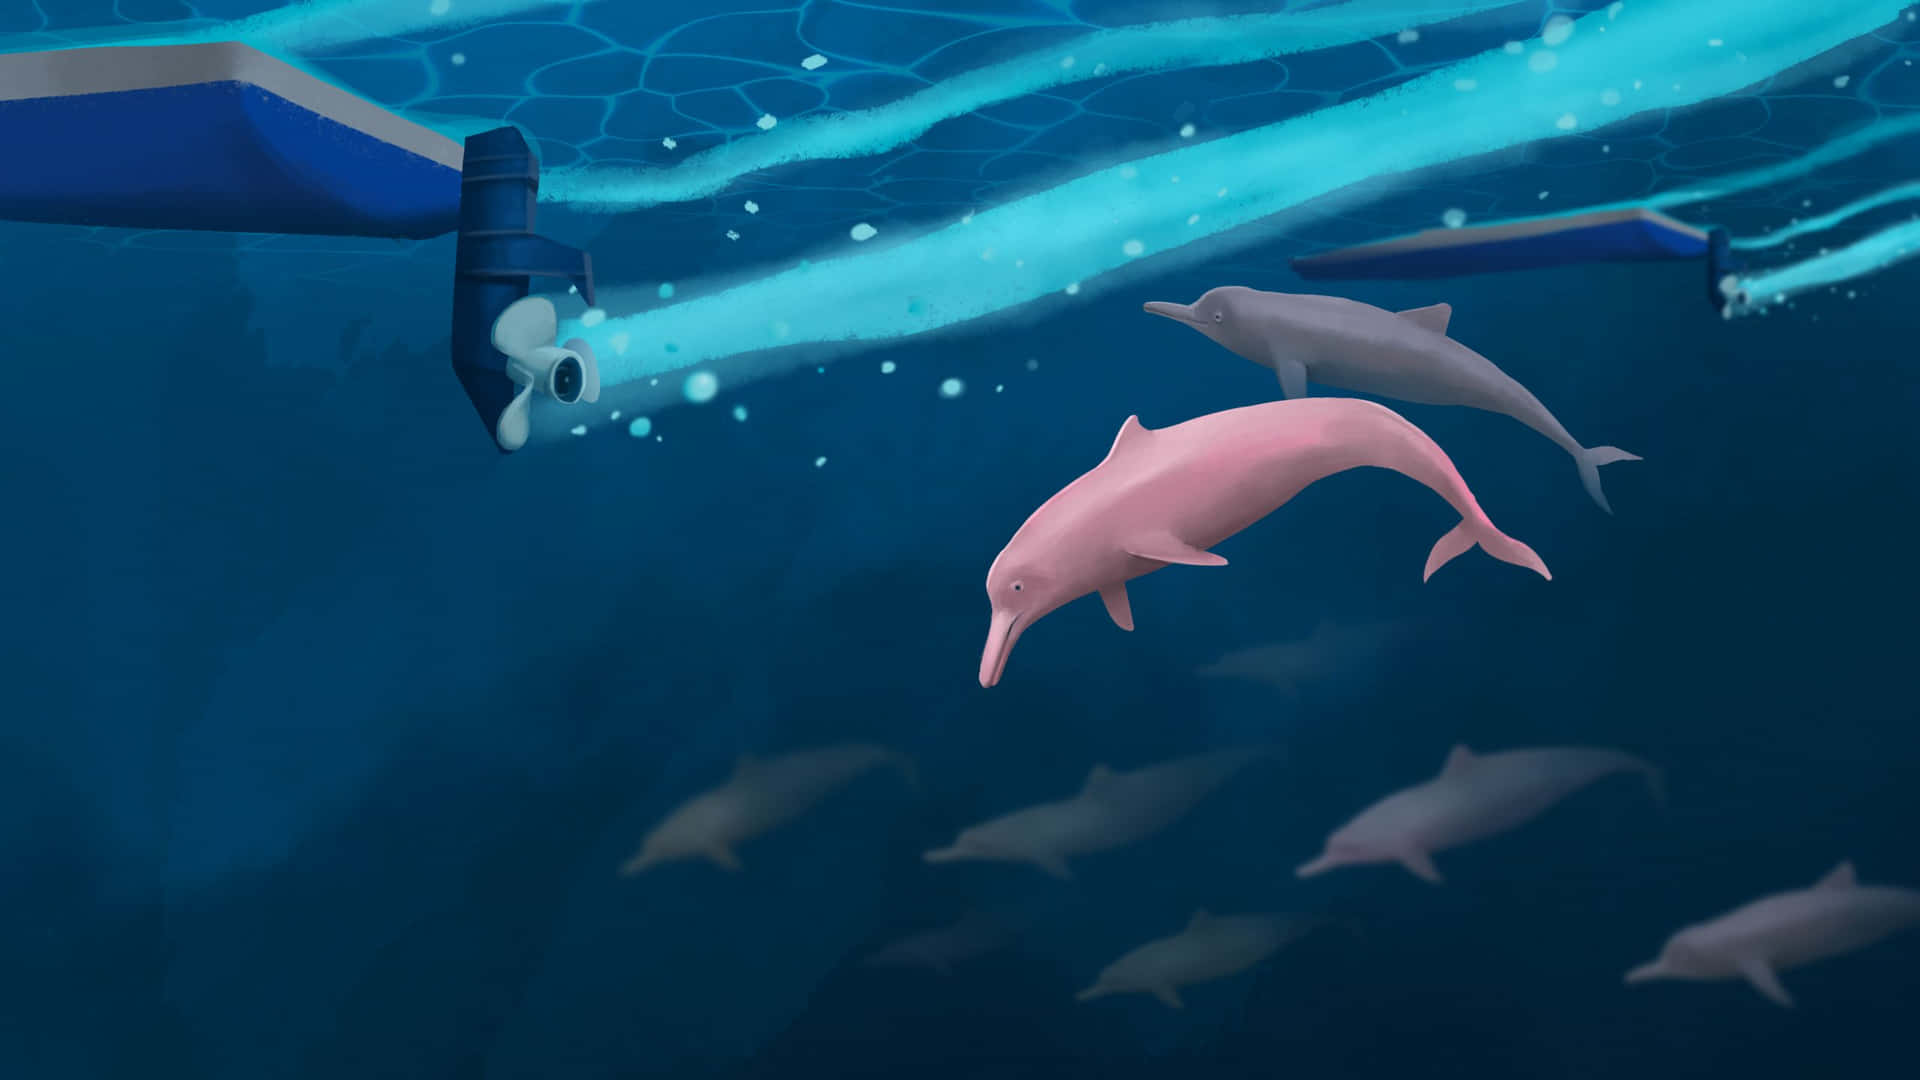 Dolphins Swimming In The Ocean With A Robot Background